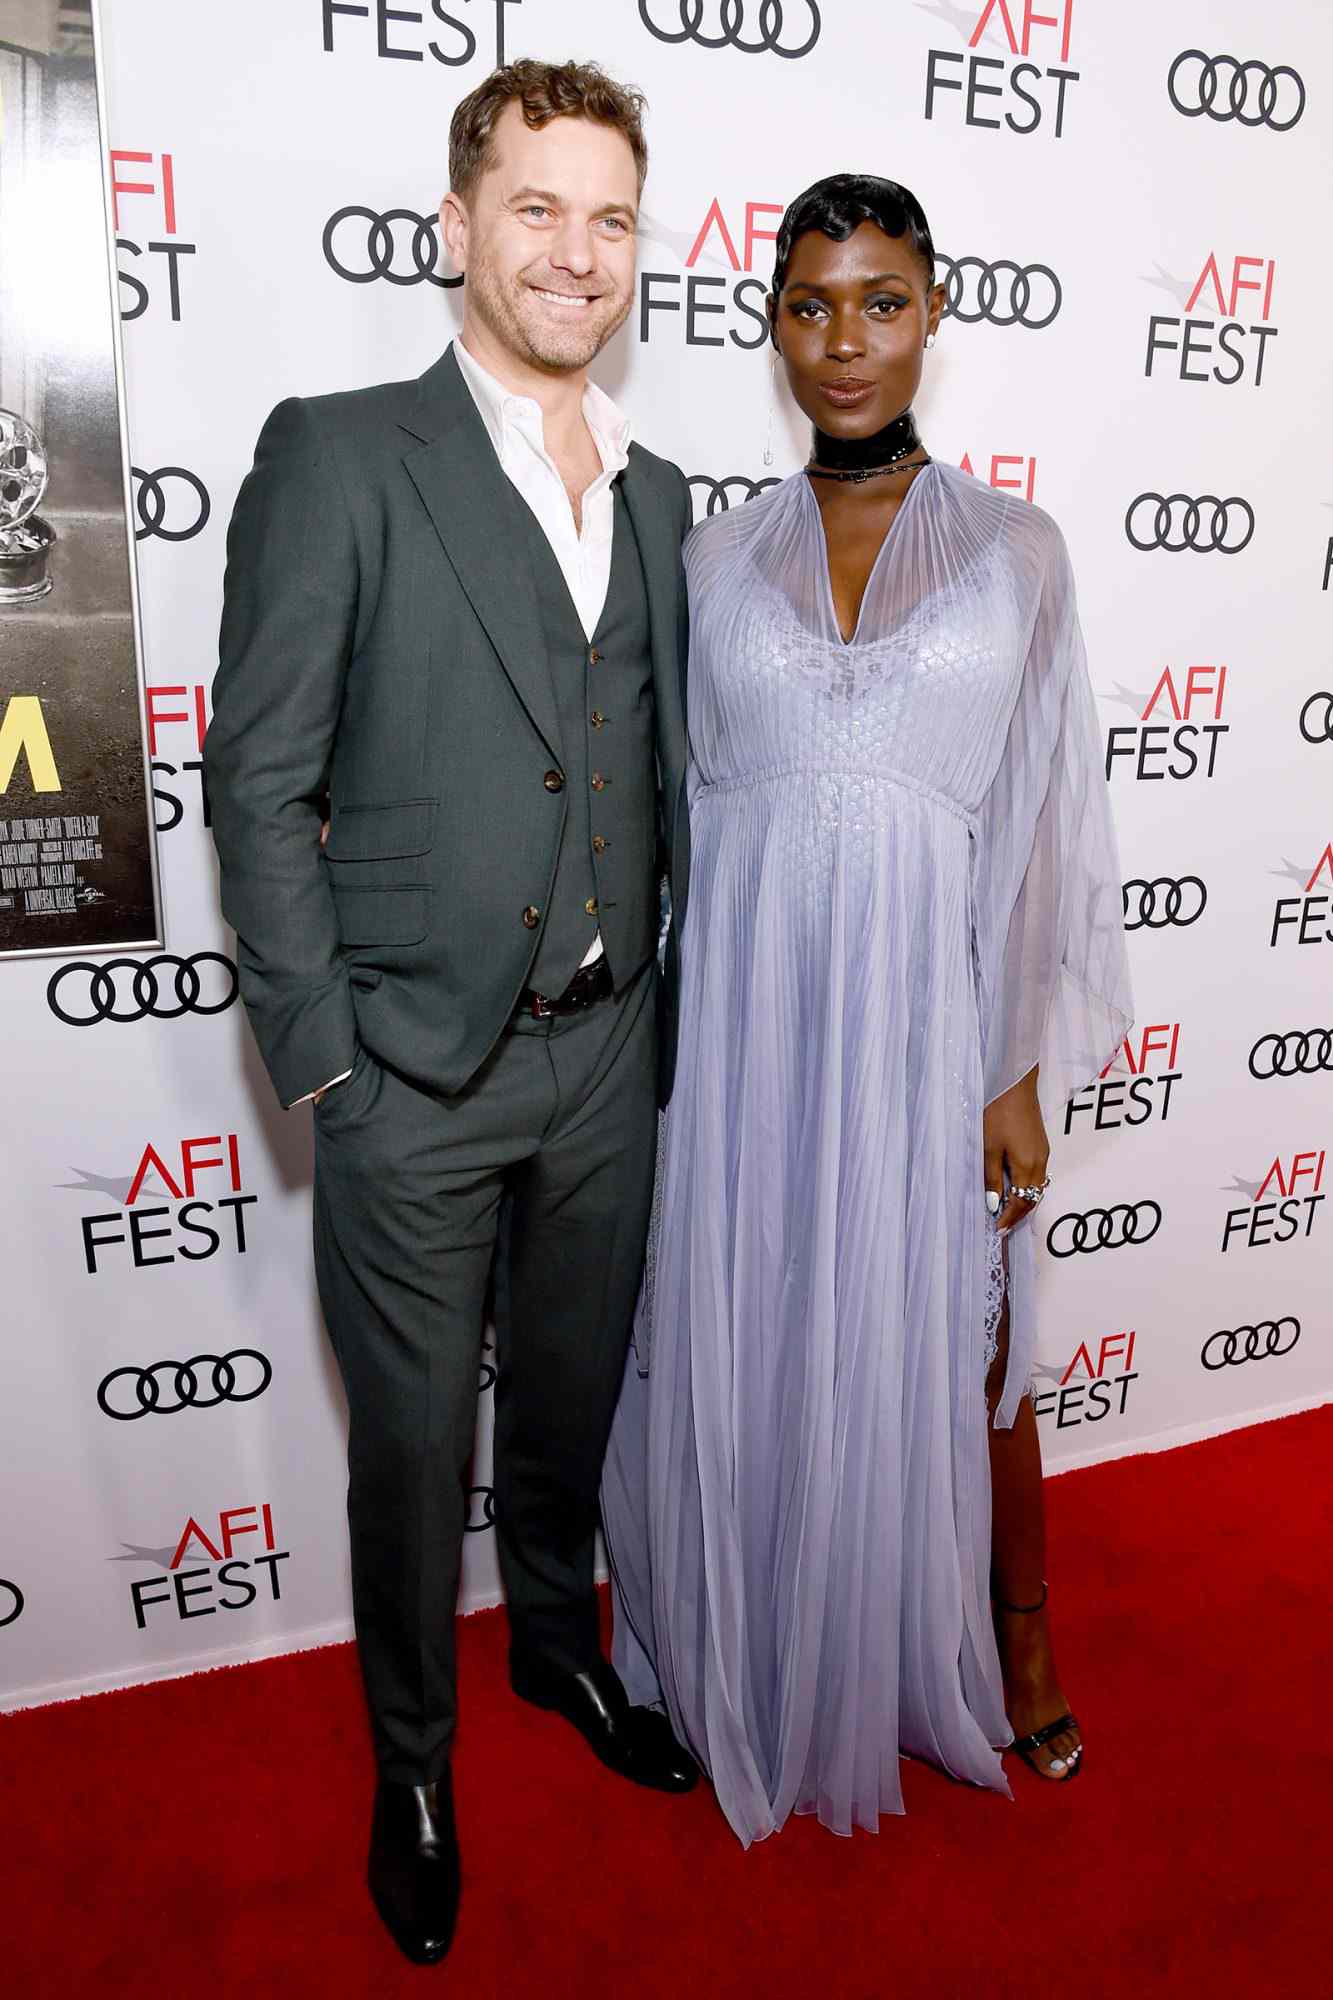 Joshua Jackson and Jodie Turner-Smith attend the "Queen & Slim" Premiere at AFI FEST 2019 presented by Audi at the TCL Chinese Theatre on November 14, 2019 in Hollywood, California